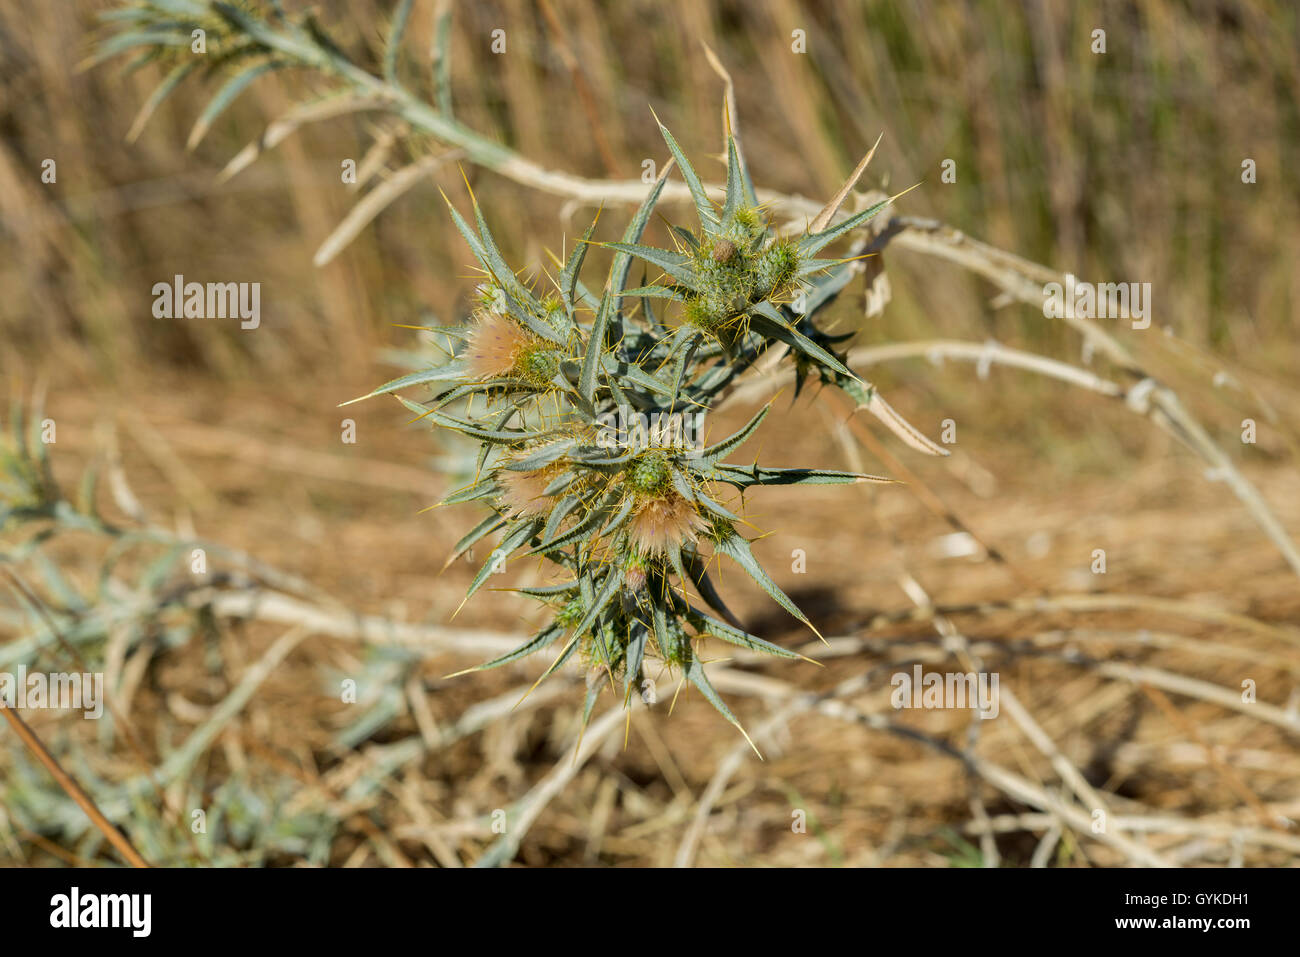 Woolly distaff thistle, Carthamus lanatus, in a stubble field. Photo taken in Ciudad Real Province, Spain Stock Photo